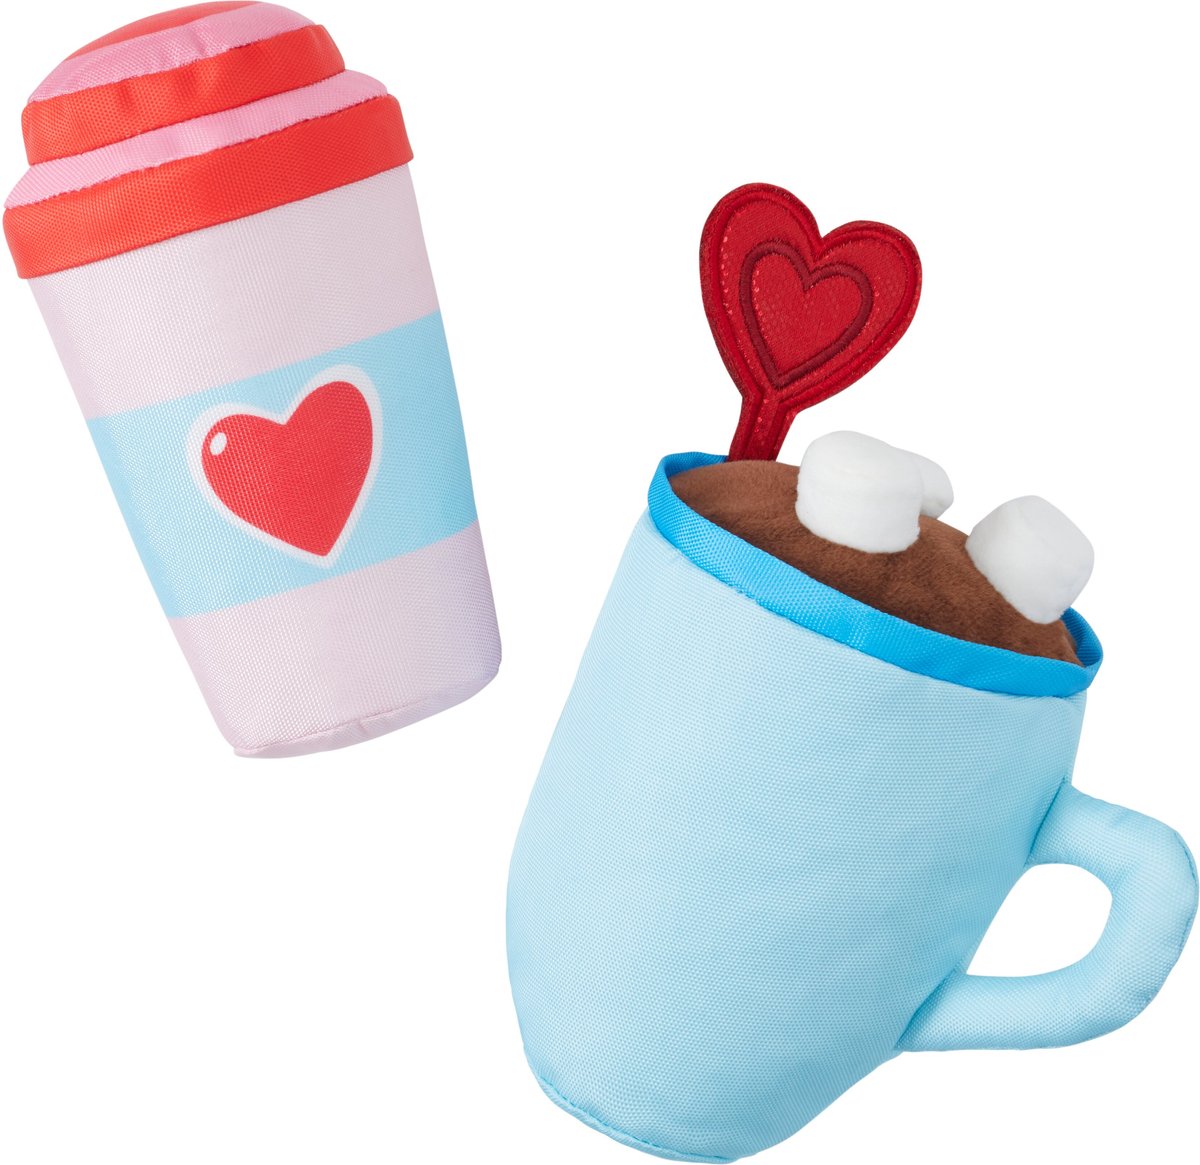 Chewy: Buy 1, Get 1 Free Select Valentine's Day Products with Code + Free Shipping Over $49